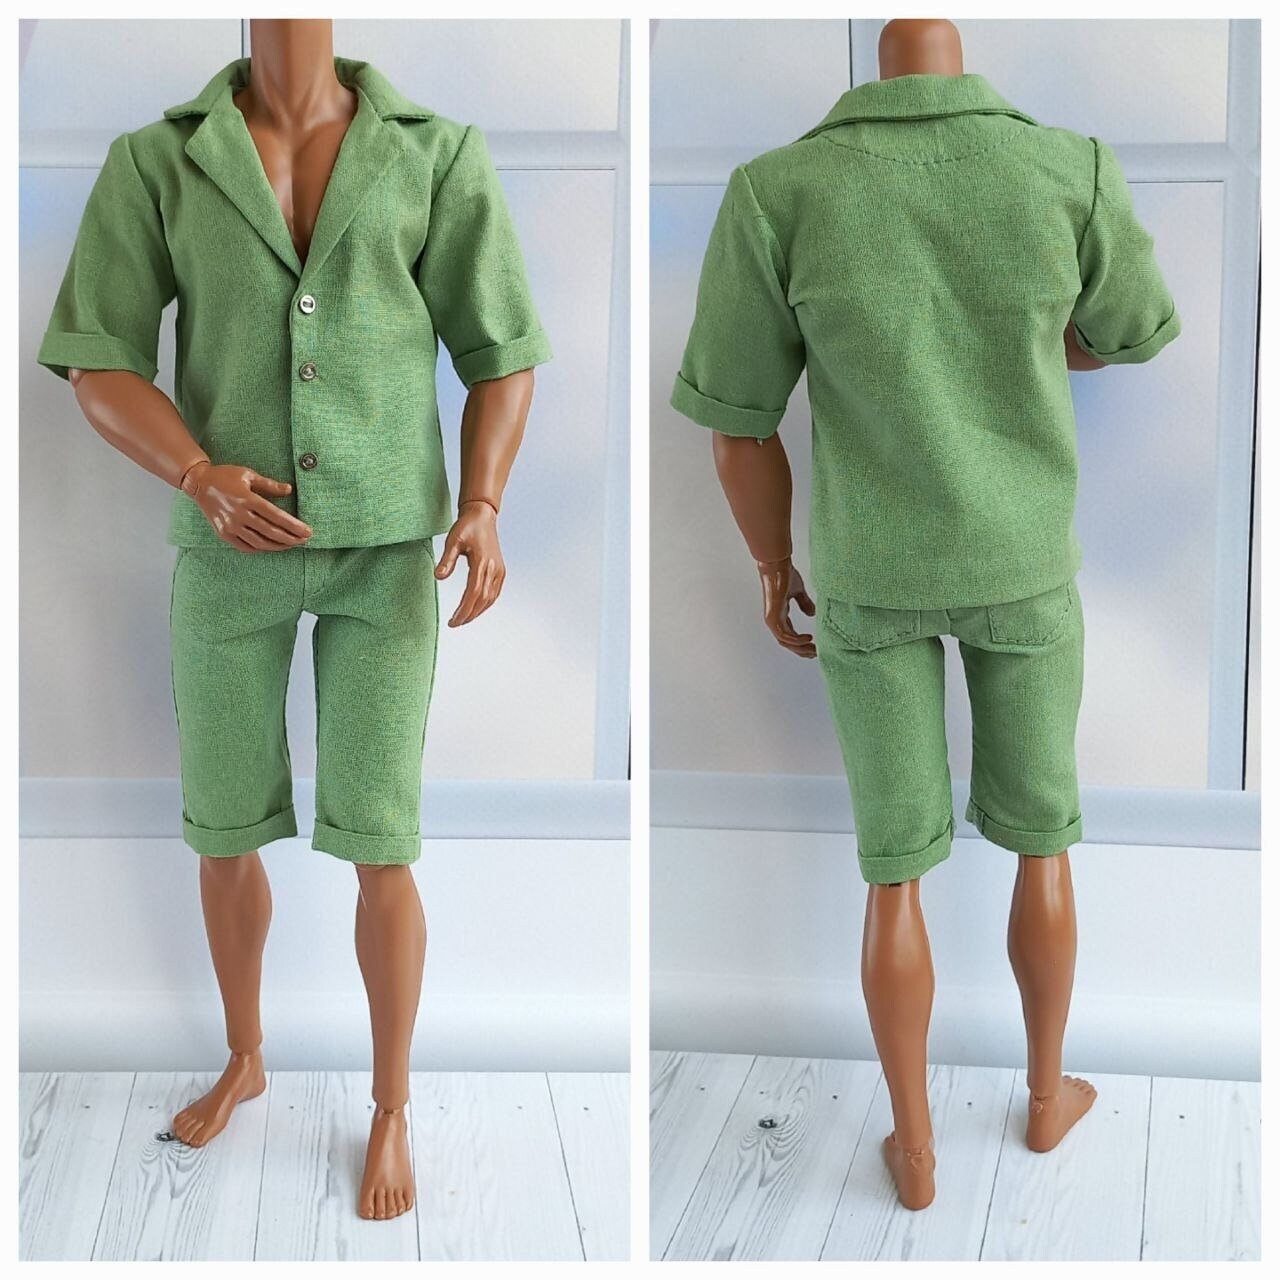 Ken Clothes/hoodie for Ken/doll Pants/sportswear Trousers/male Doll  Clothes/ 